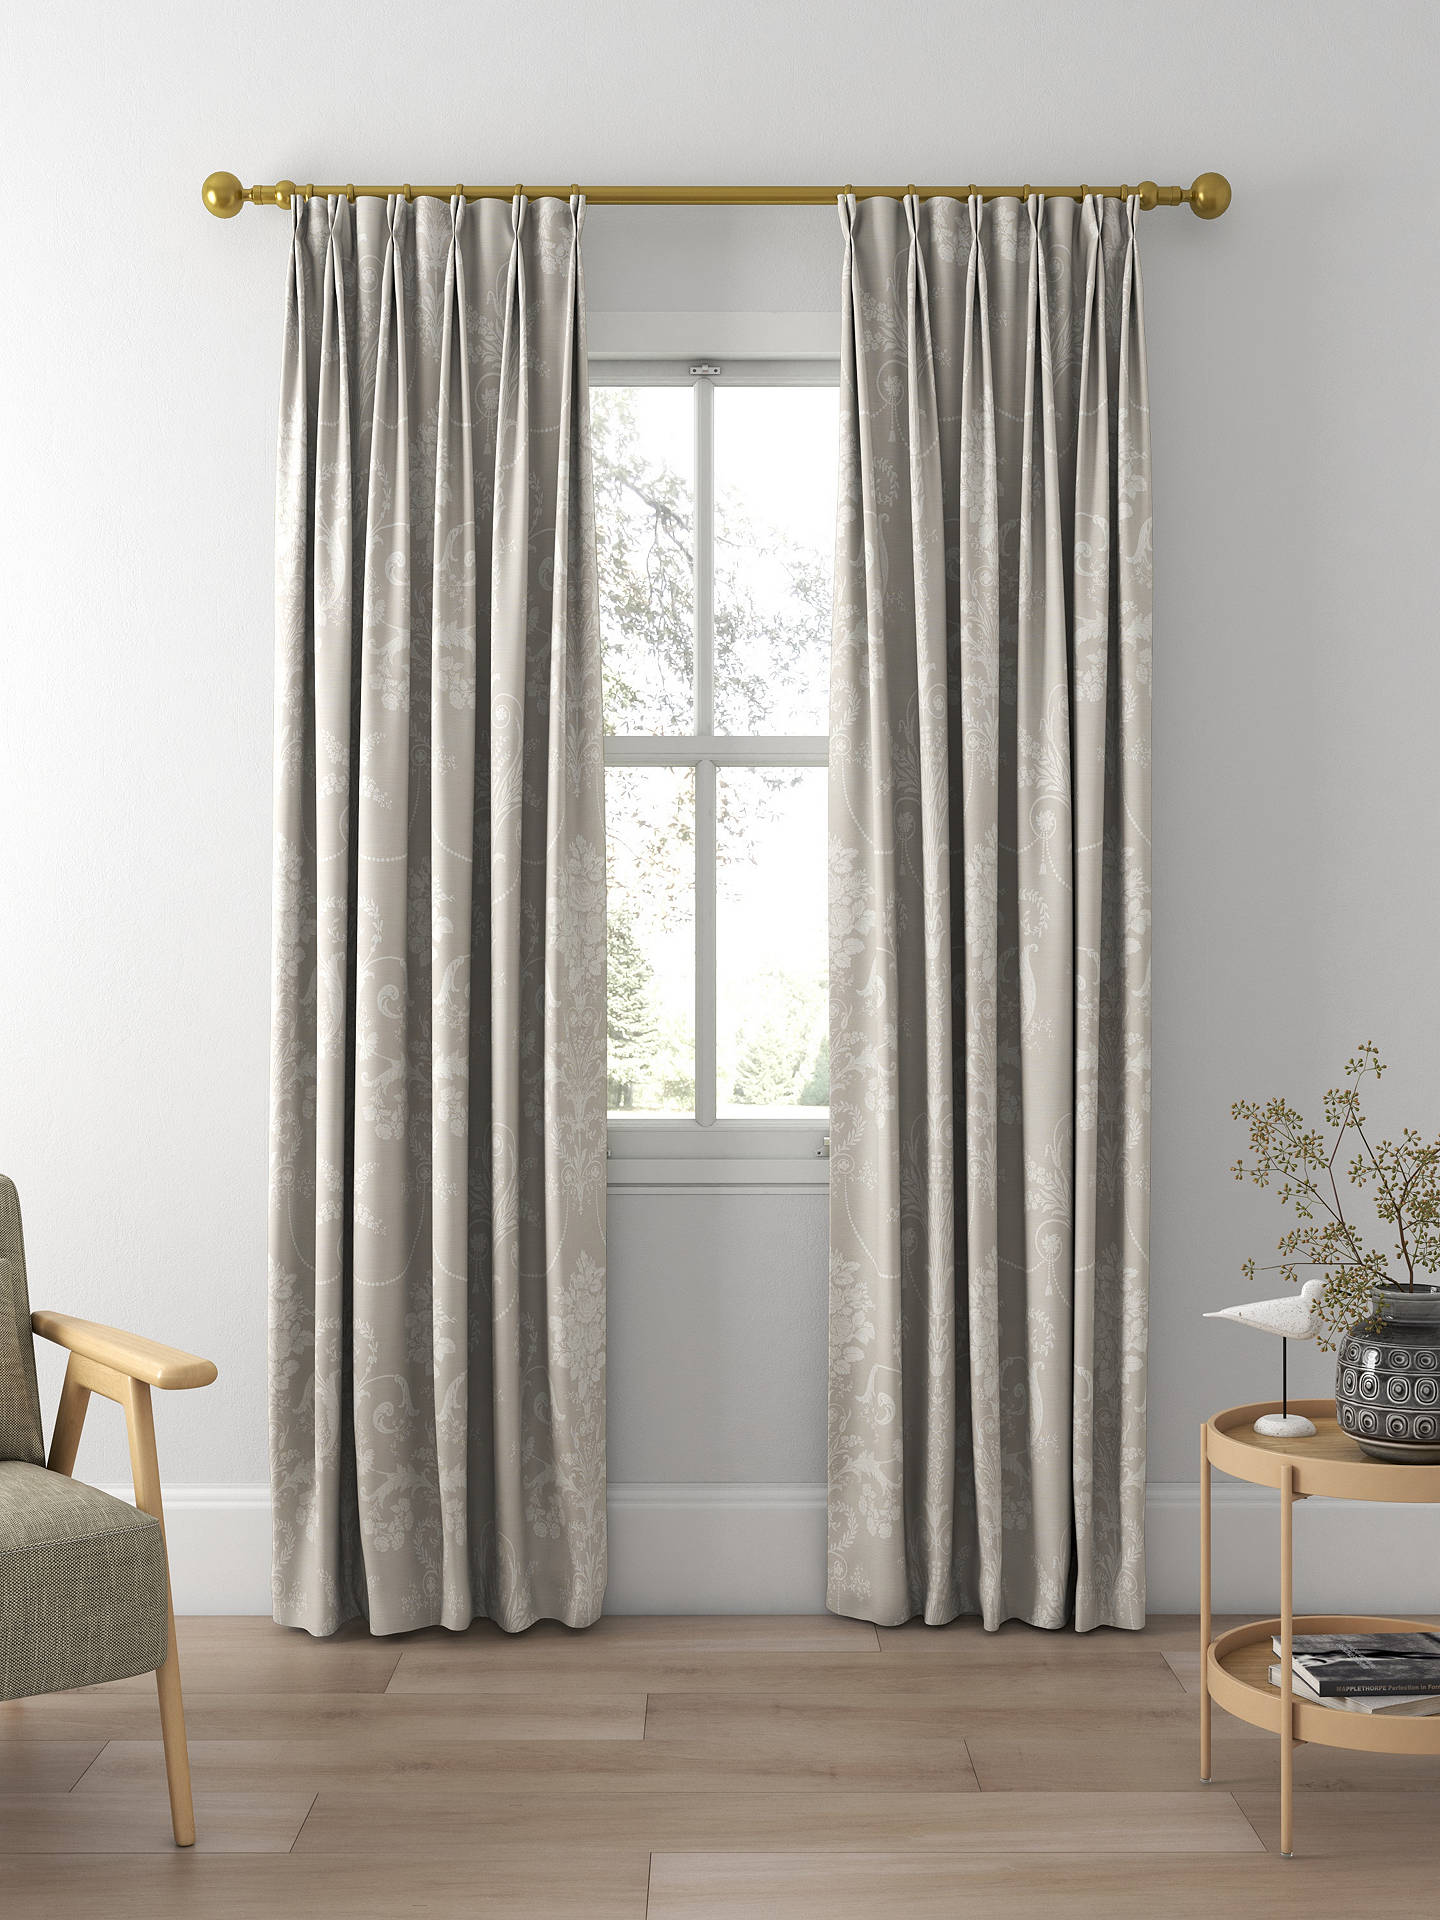 Laura Ashley Josette Made to Measure Curtains, Dove Grey